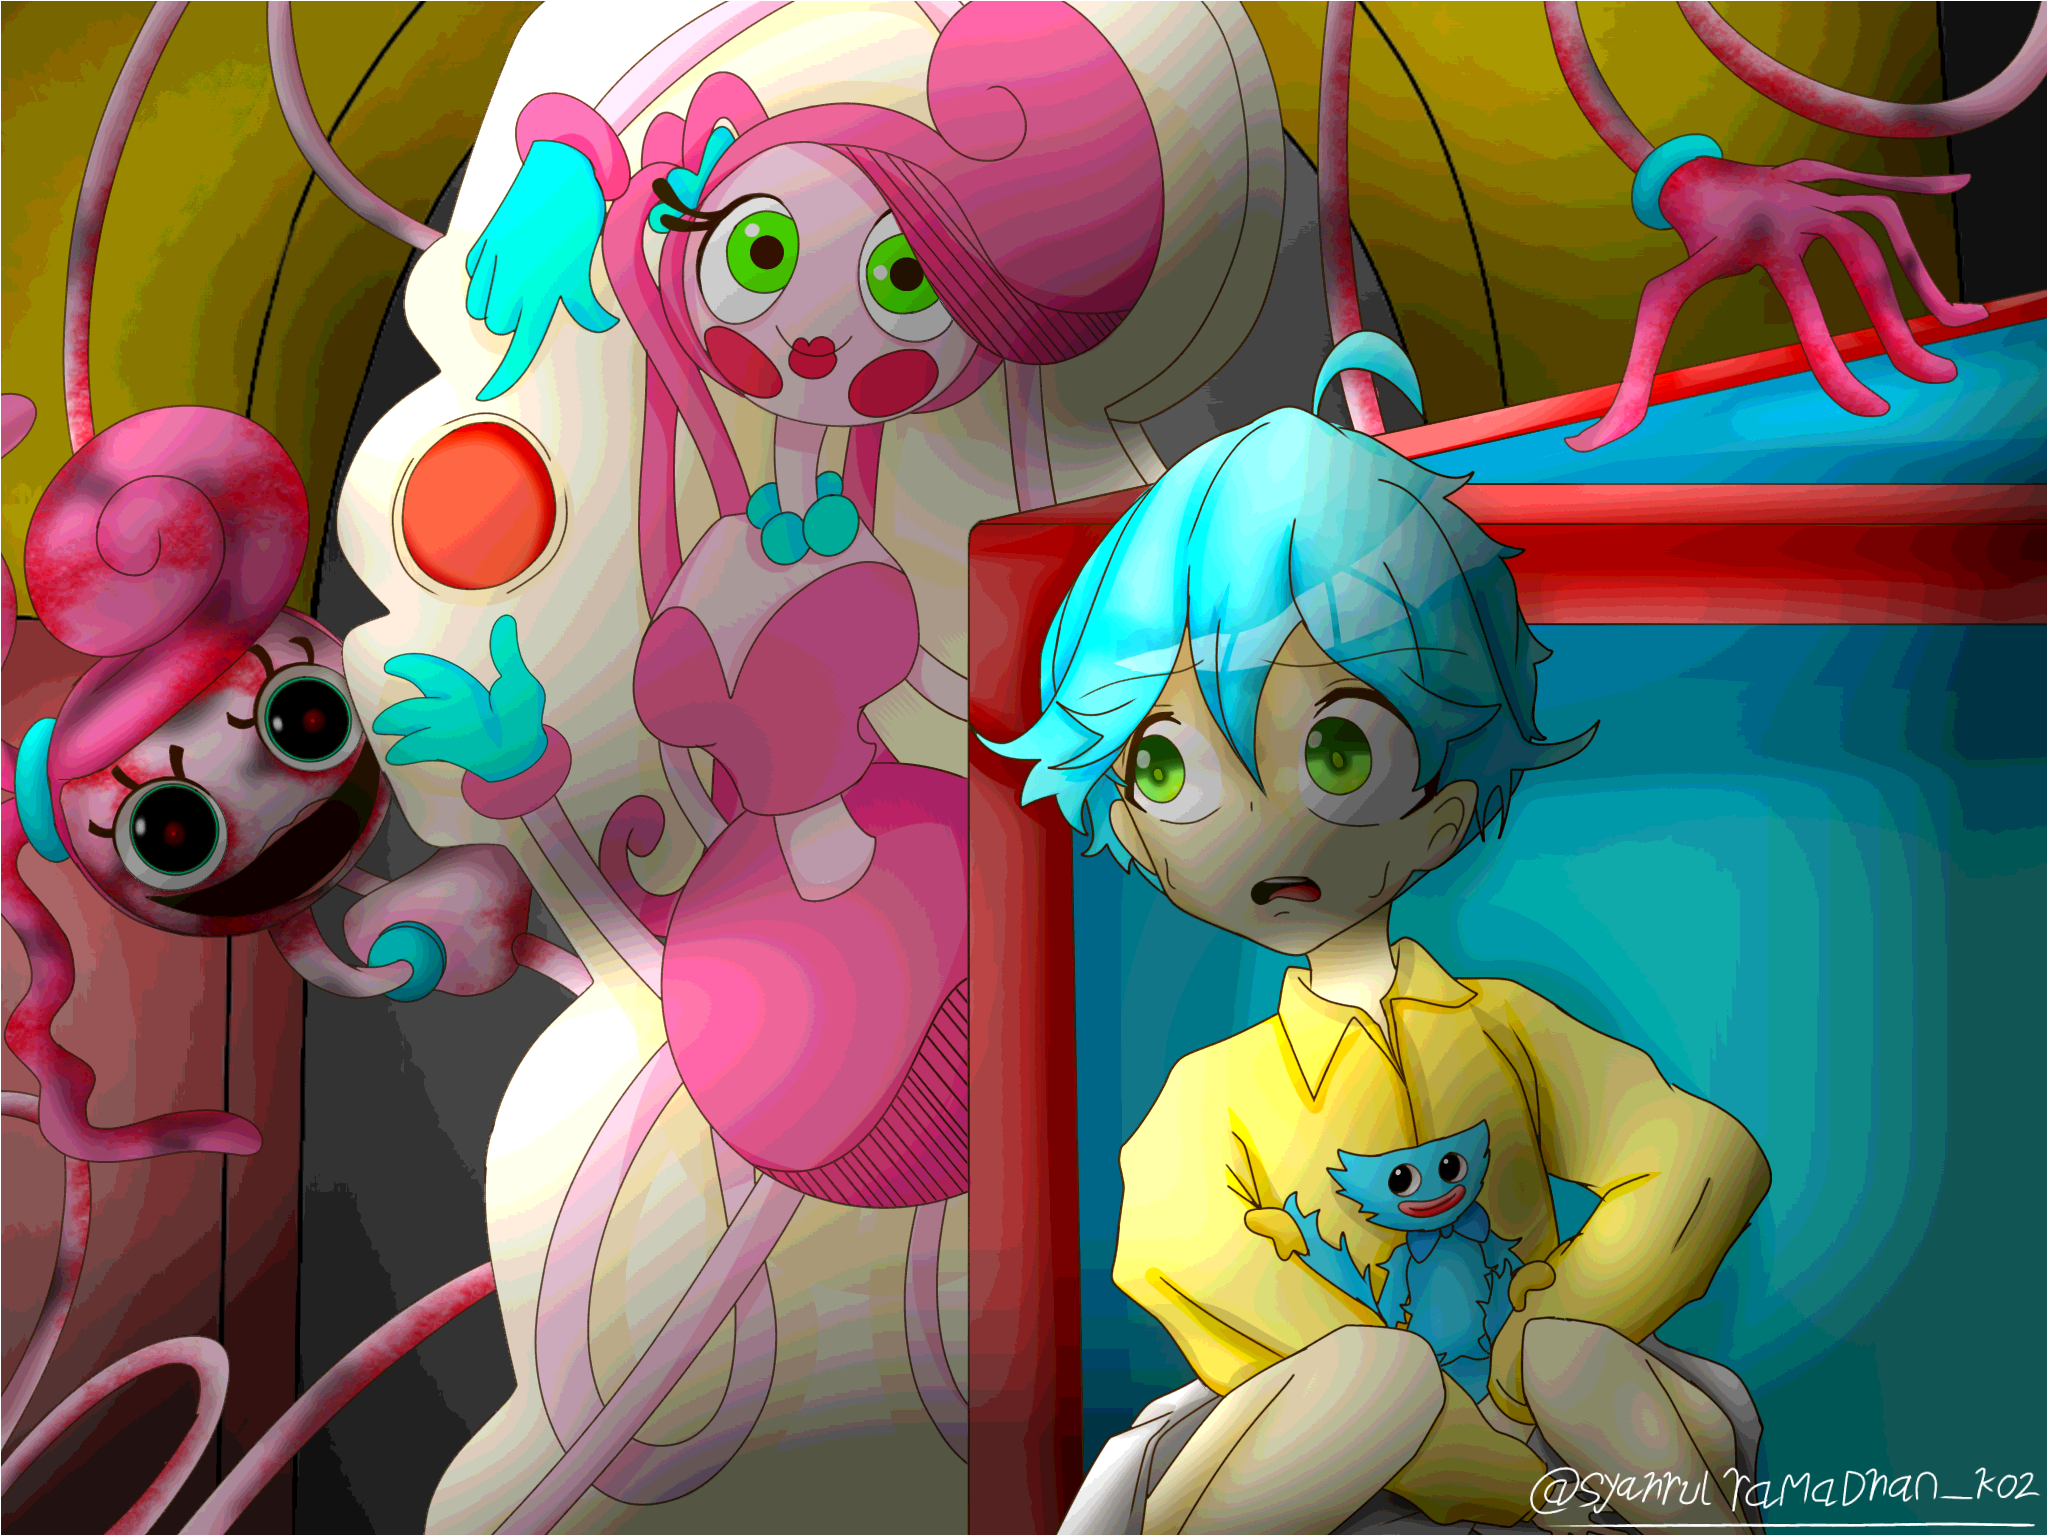 Poppy Playtime Chapter 2 by MeekaNomicon on DeviantArt